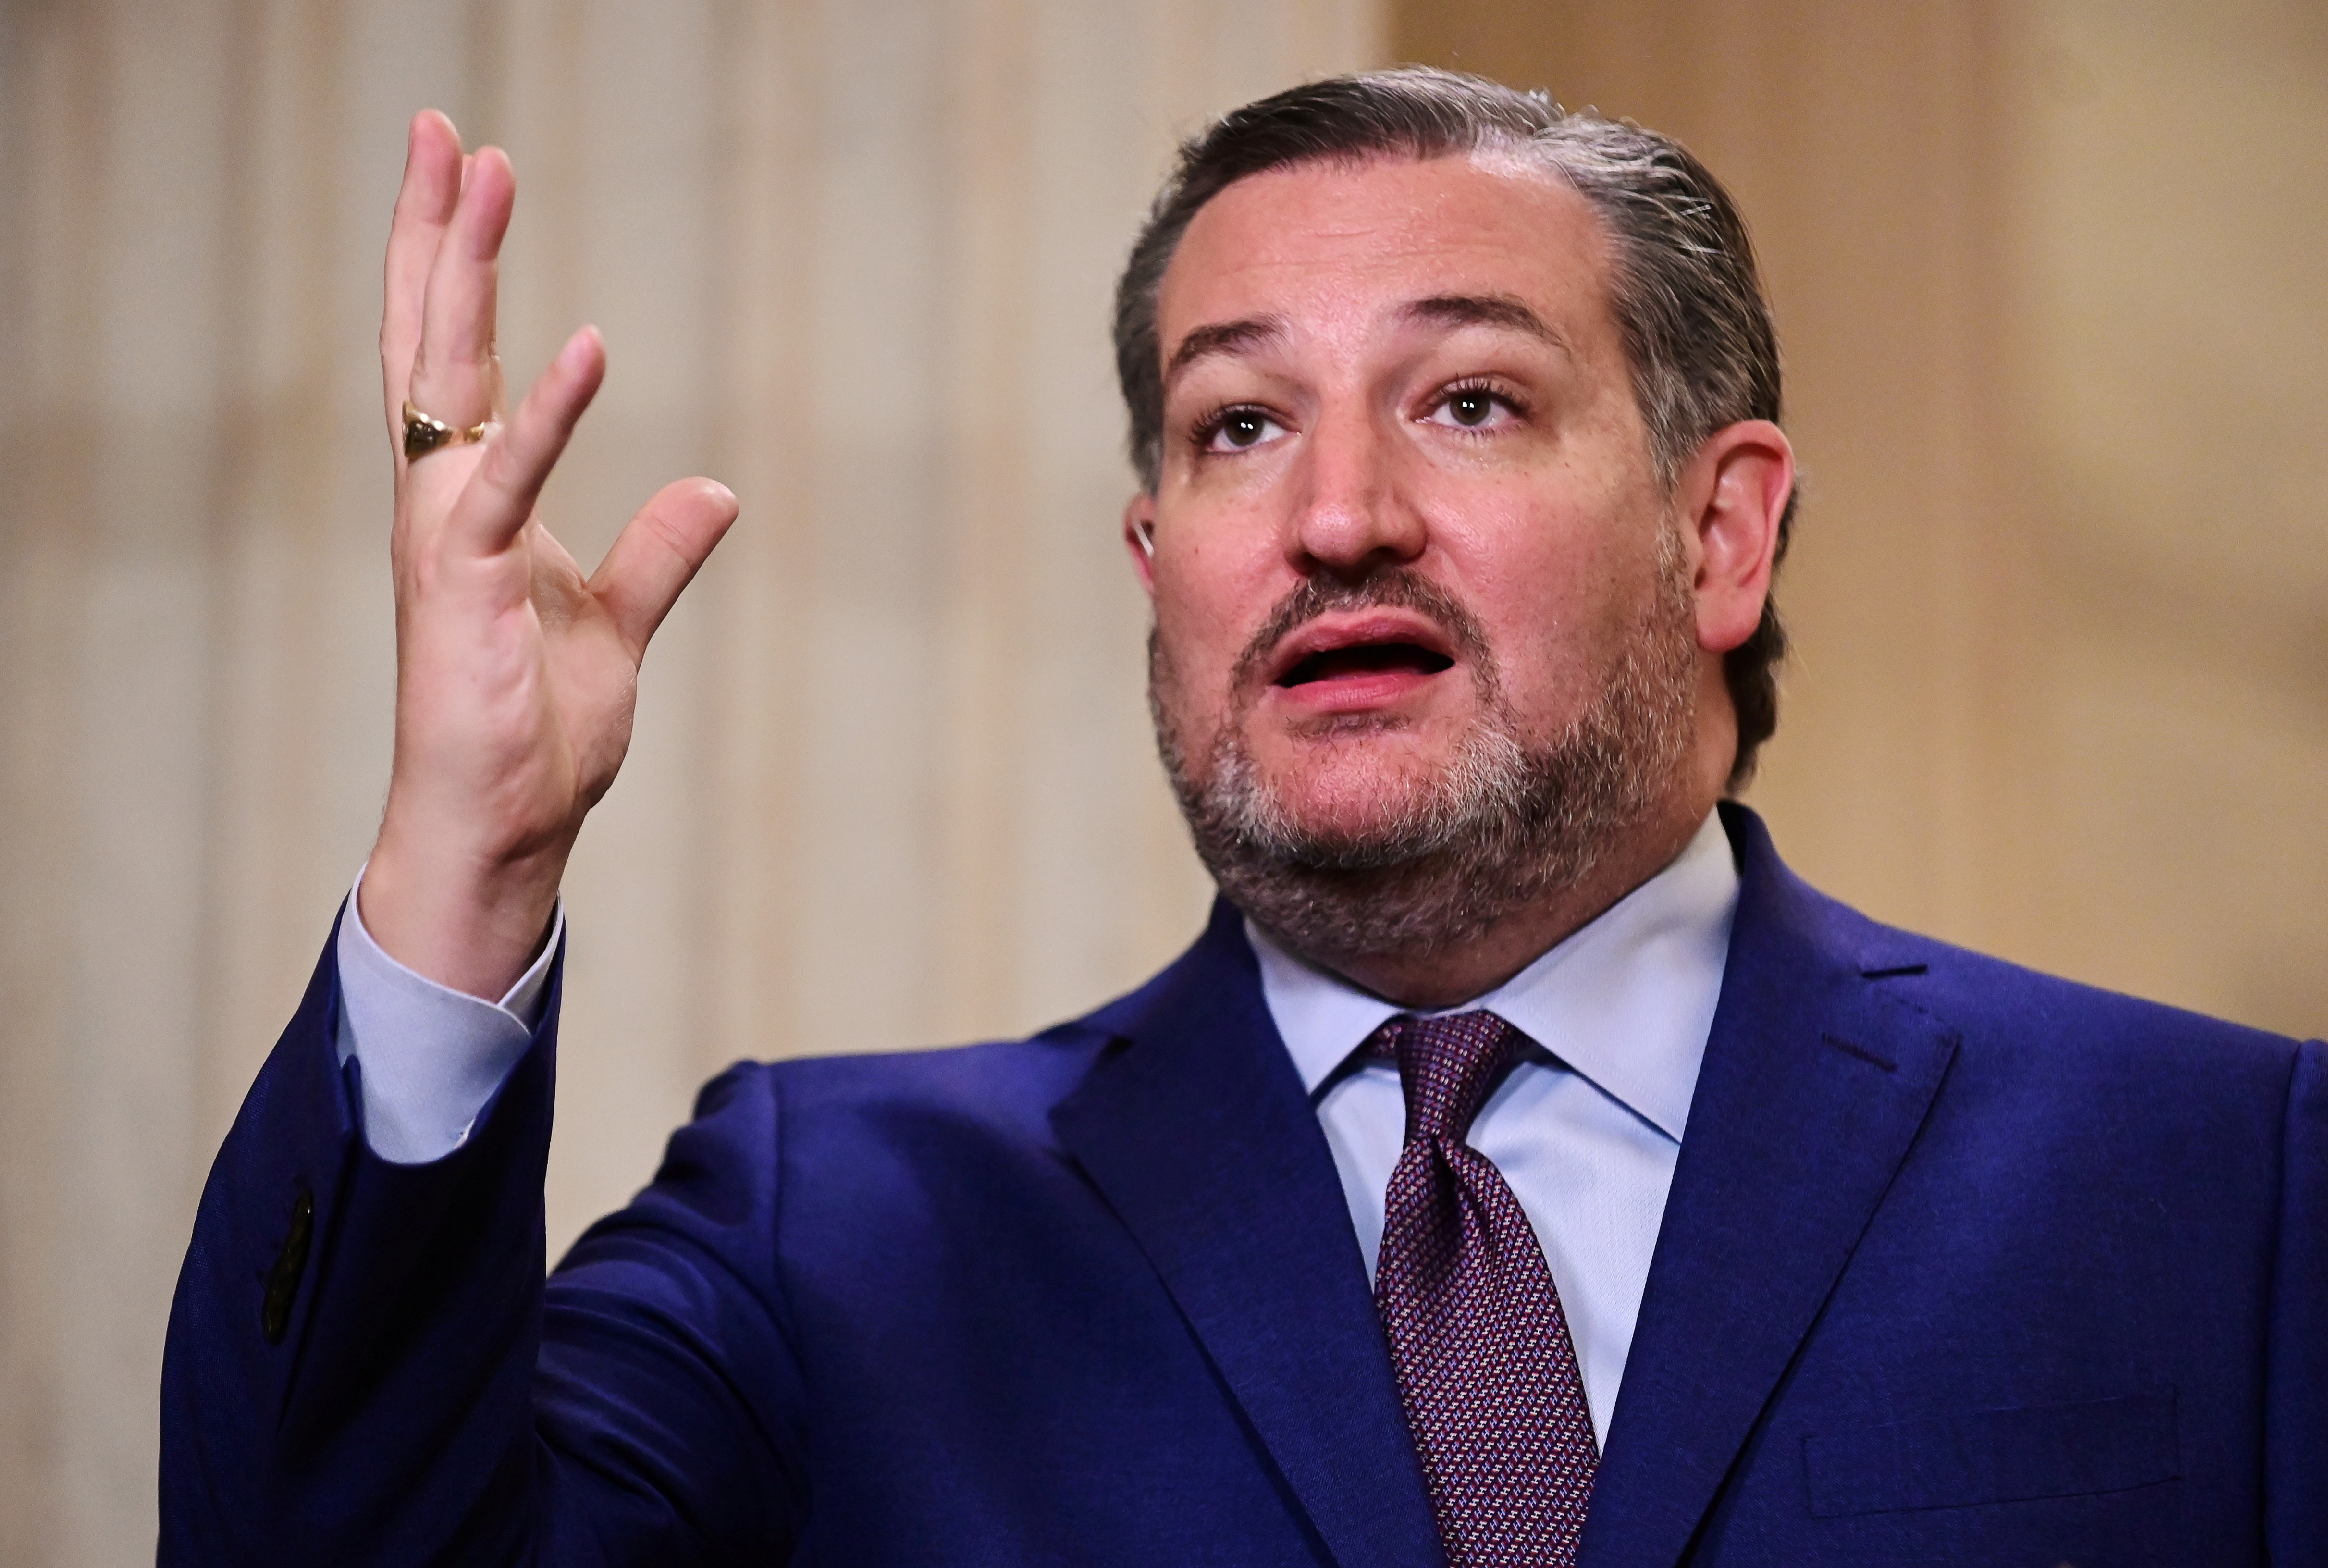 U.S. Senator Ted Cruz (R-TX) attends a television interview in response to U.S. President Joe Biden's first address to a joint session of the U.S. Congress, at the U.S. Capitol in Washington